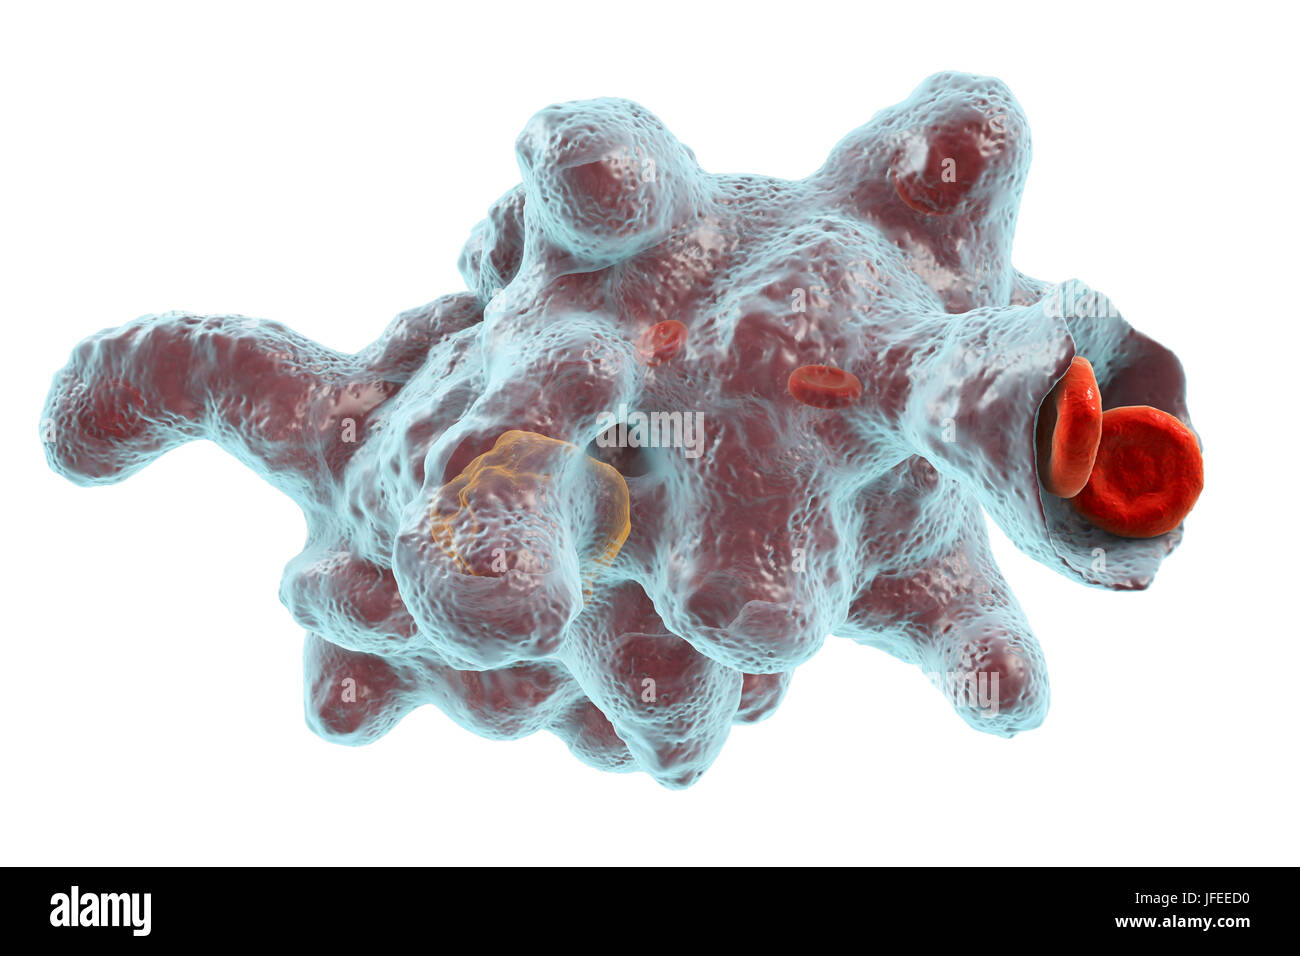 Parasitic amoeba (Entamoeba histolytica), computer illustration. This single-celled organism causes amoebic dysentery and ulcers (vegetative trophozoite stage). It is spread by faecal contamination of food and water and is most common where sanitation is poor. Amoebae invade the intestine but may spread to the liver, lungs and other tissues. Infection is caused by the ingestion of cysts that develop into the pathogenic trophozoite amoeba seen here. Entamoeba histolytica occurs worldwide, with up to 50% of the population being infected primarily in warmer climates. Stock Photo